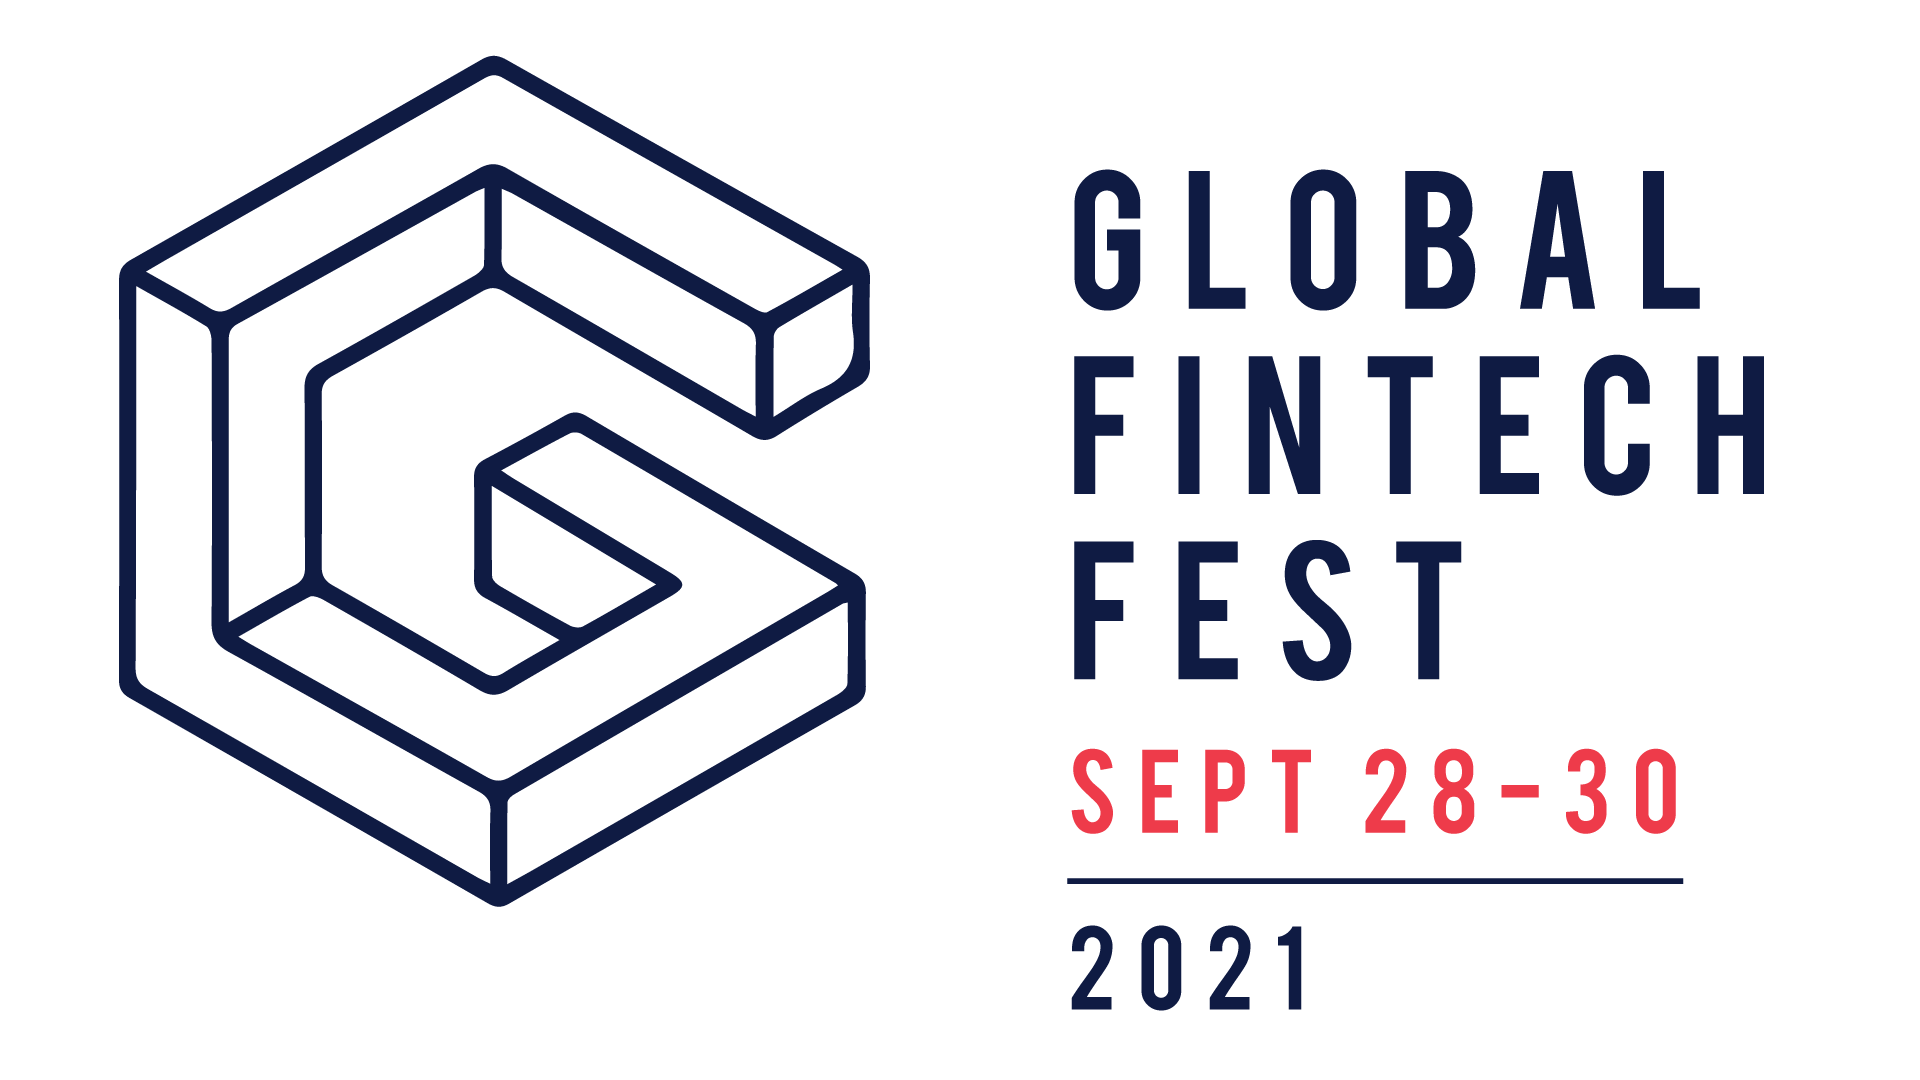 Global FinTech Fest 2021 organized by Internet and Mobile Association of India